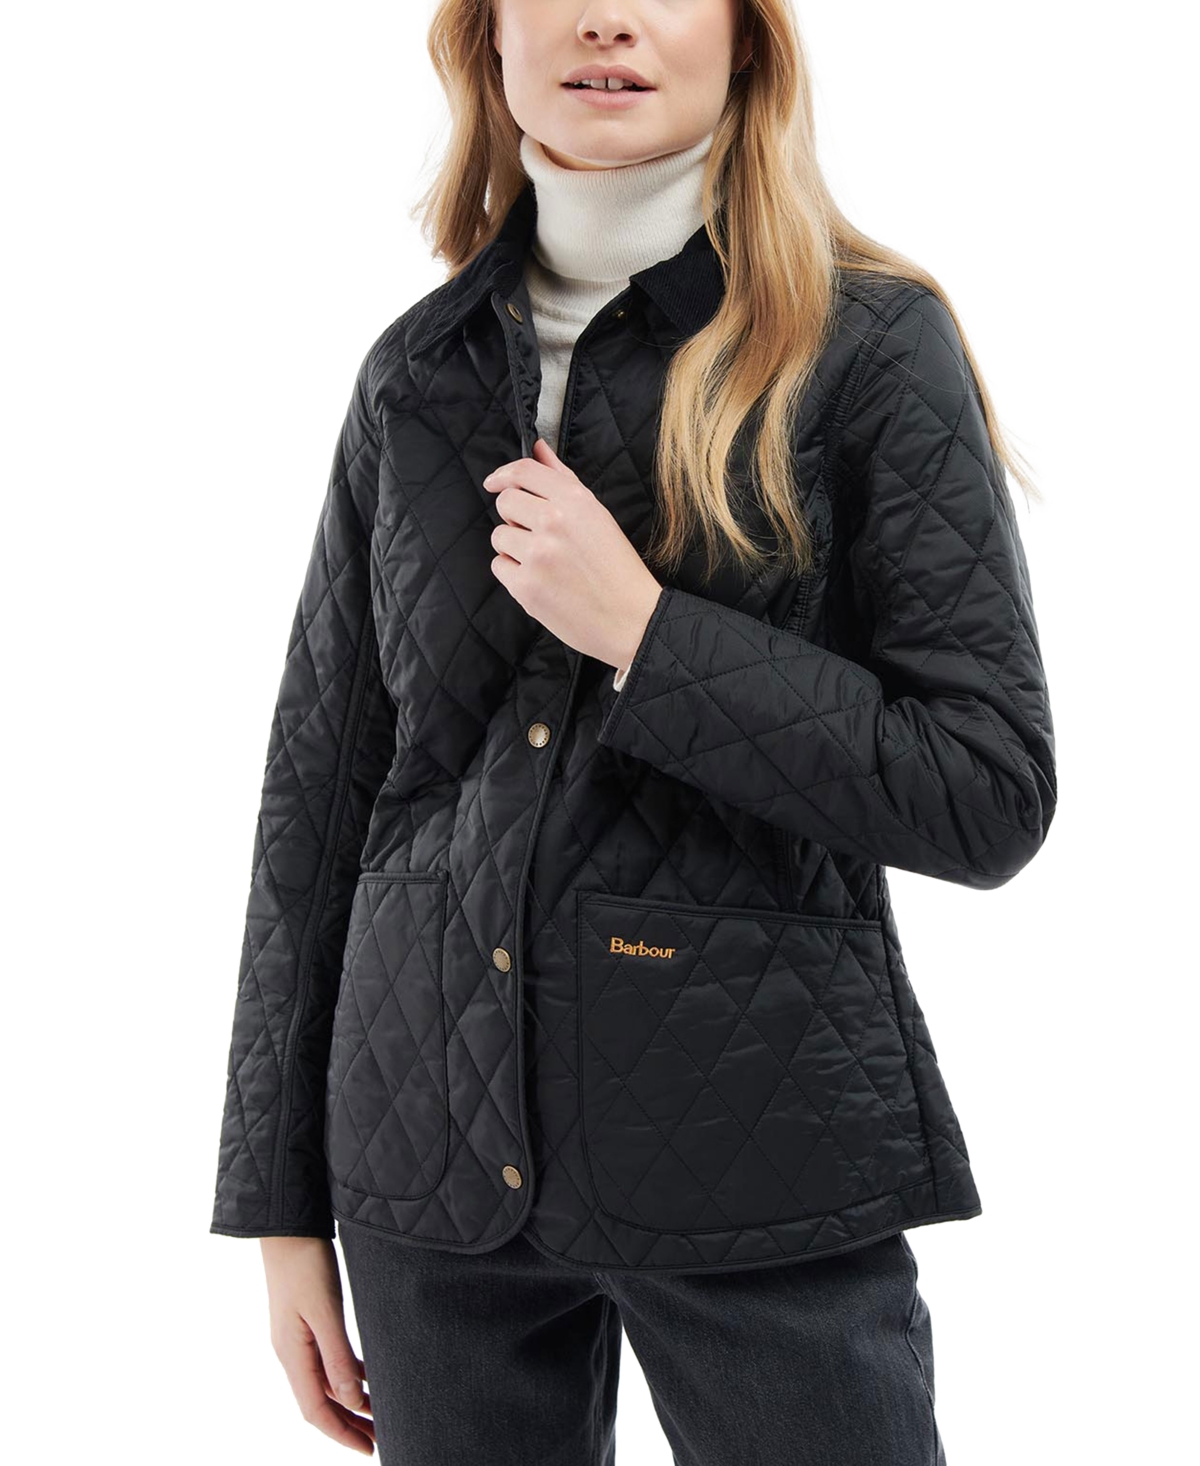 Barbour Women's Annandale Quilted Jacket